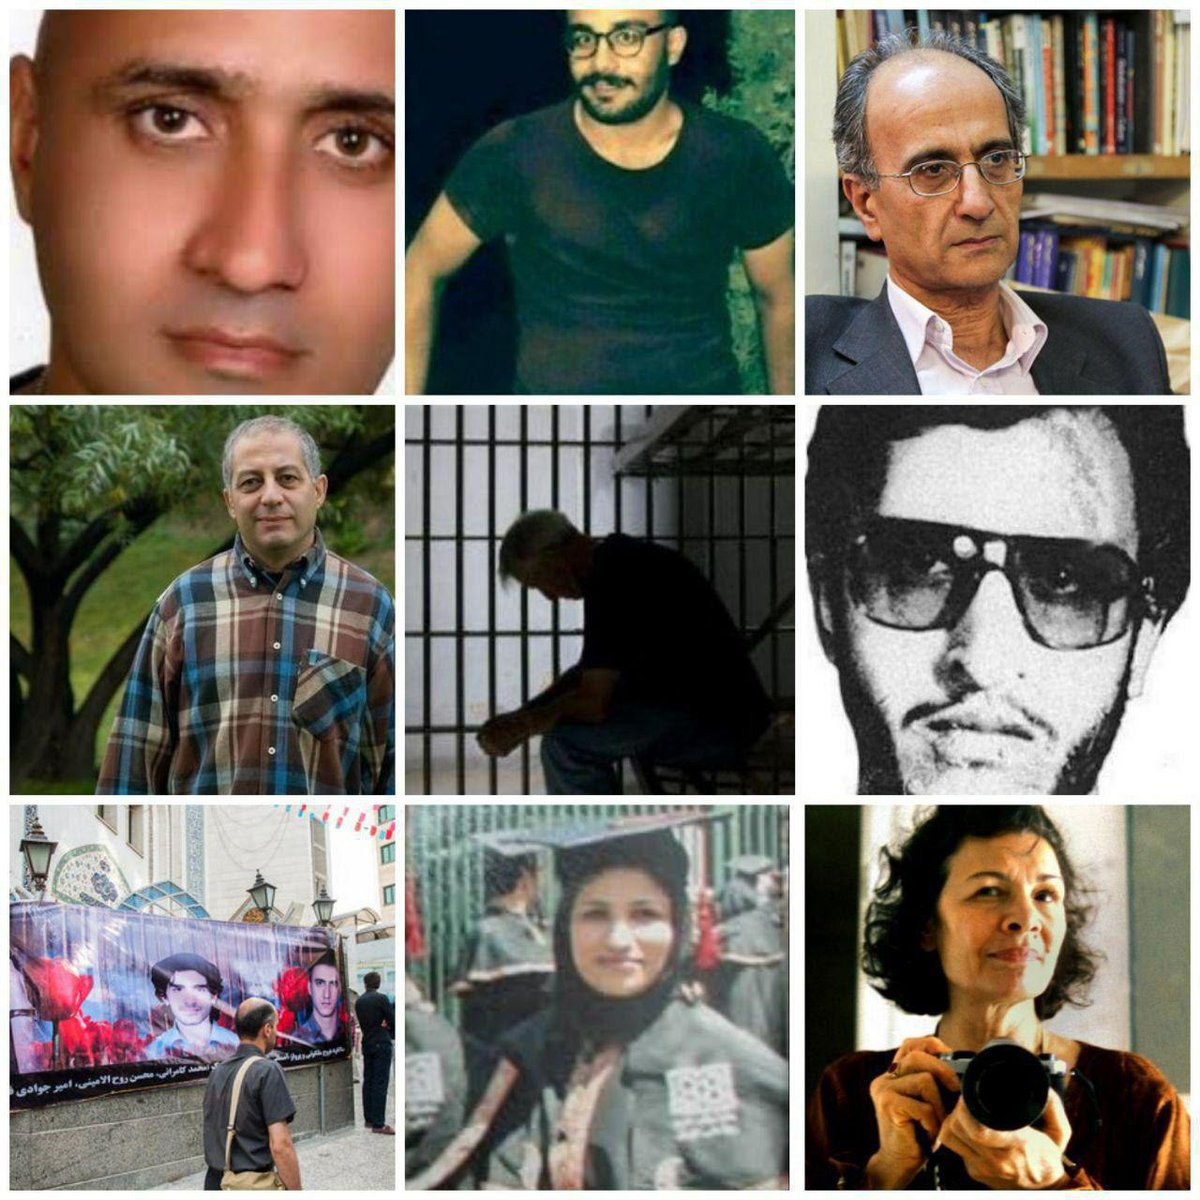 6)The volume of criteria pushed out by these “Iranian” voices about Khashoggi is completely non-balanced in comparison to their deafening silence about Sattar Beheshti, Zahra Kazemi, Kavous Seyed Emami & many other Iranian activists/reporters imprisoned & killed under torture.